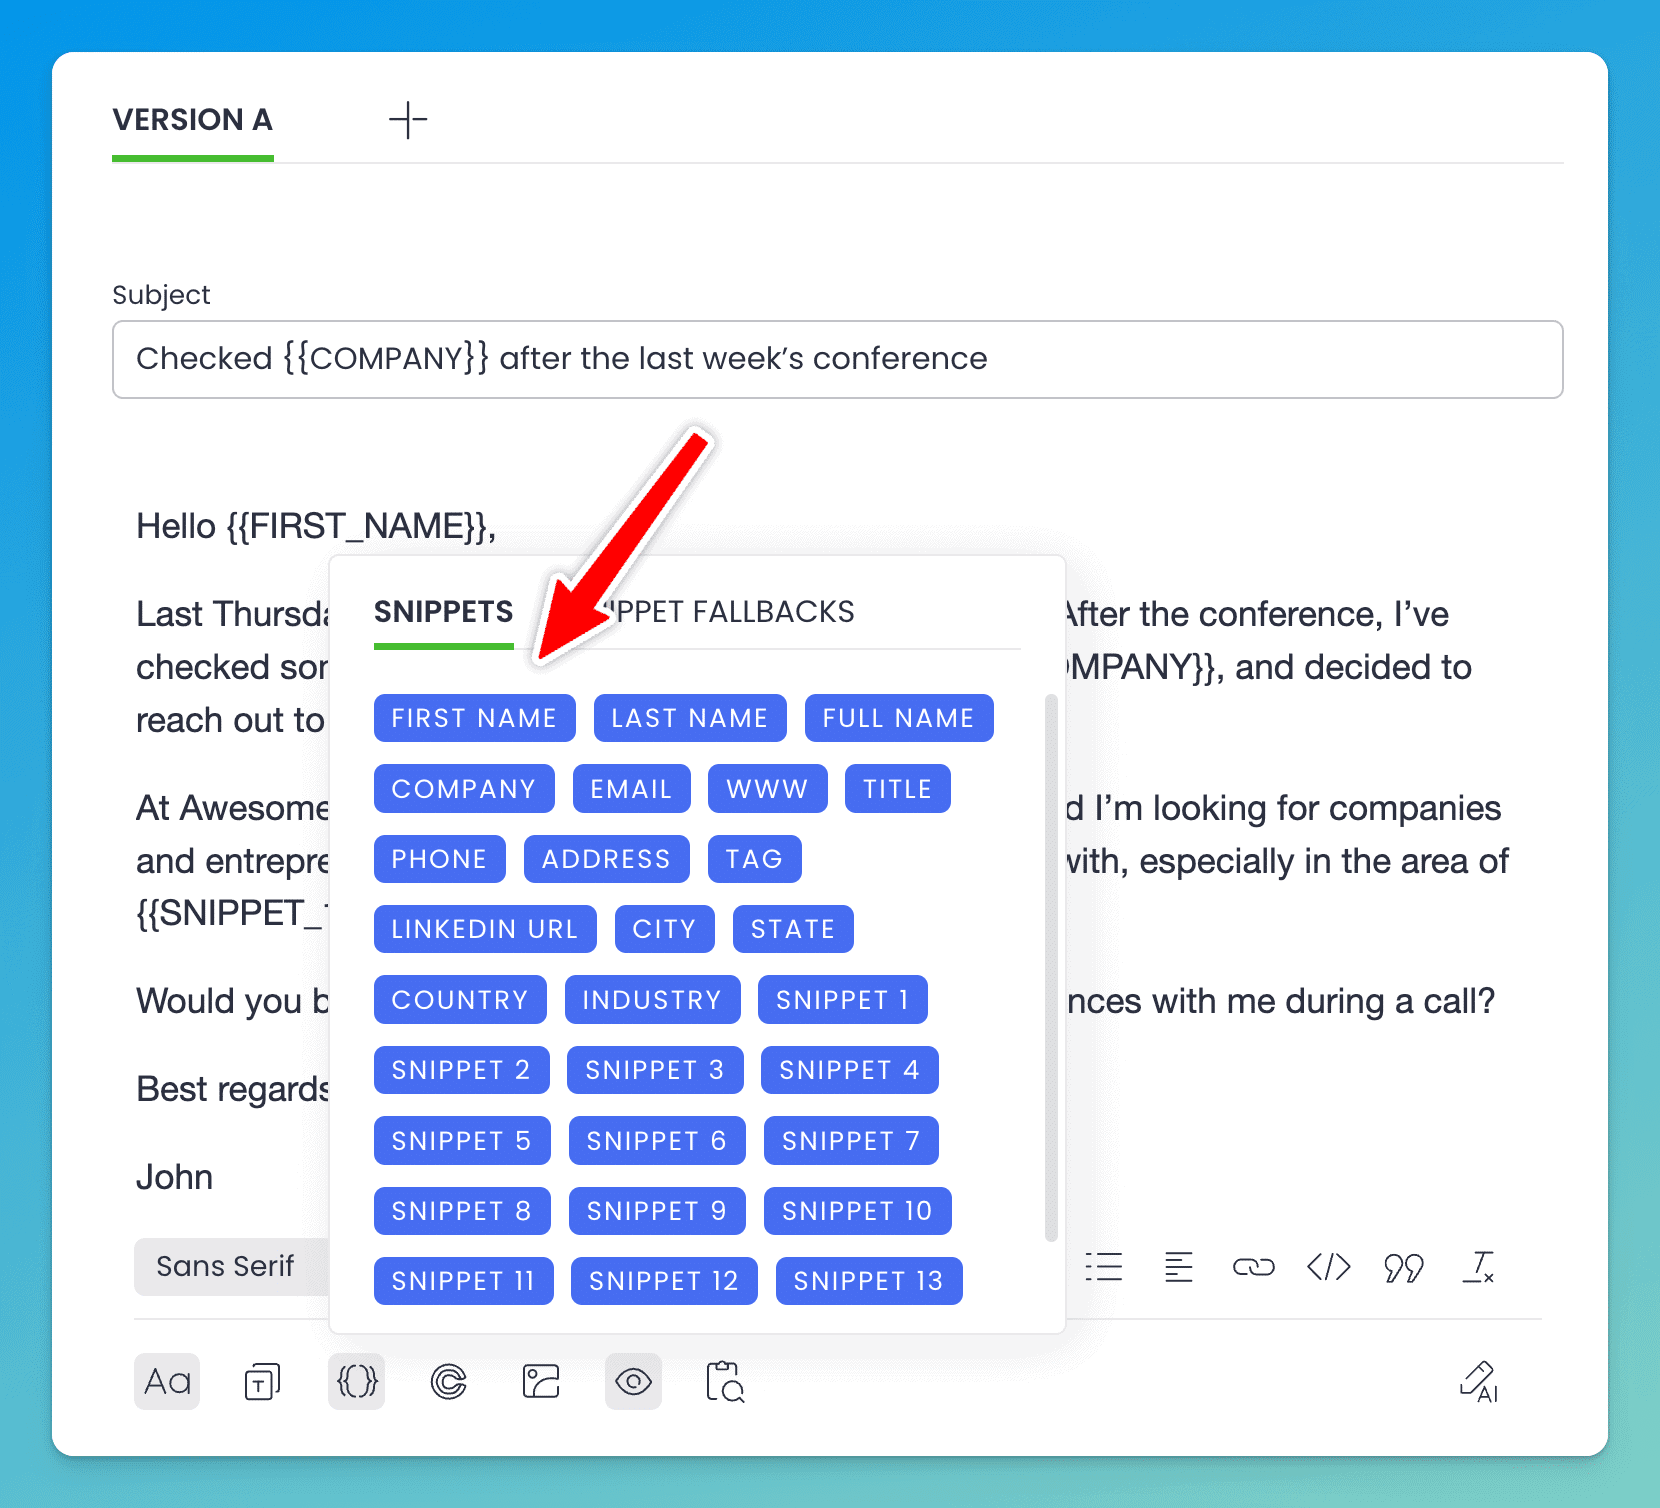 Dynamic Snippet data options when sending cold emails with the woodpecker email platform.